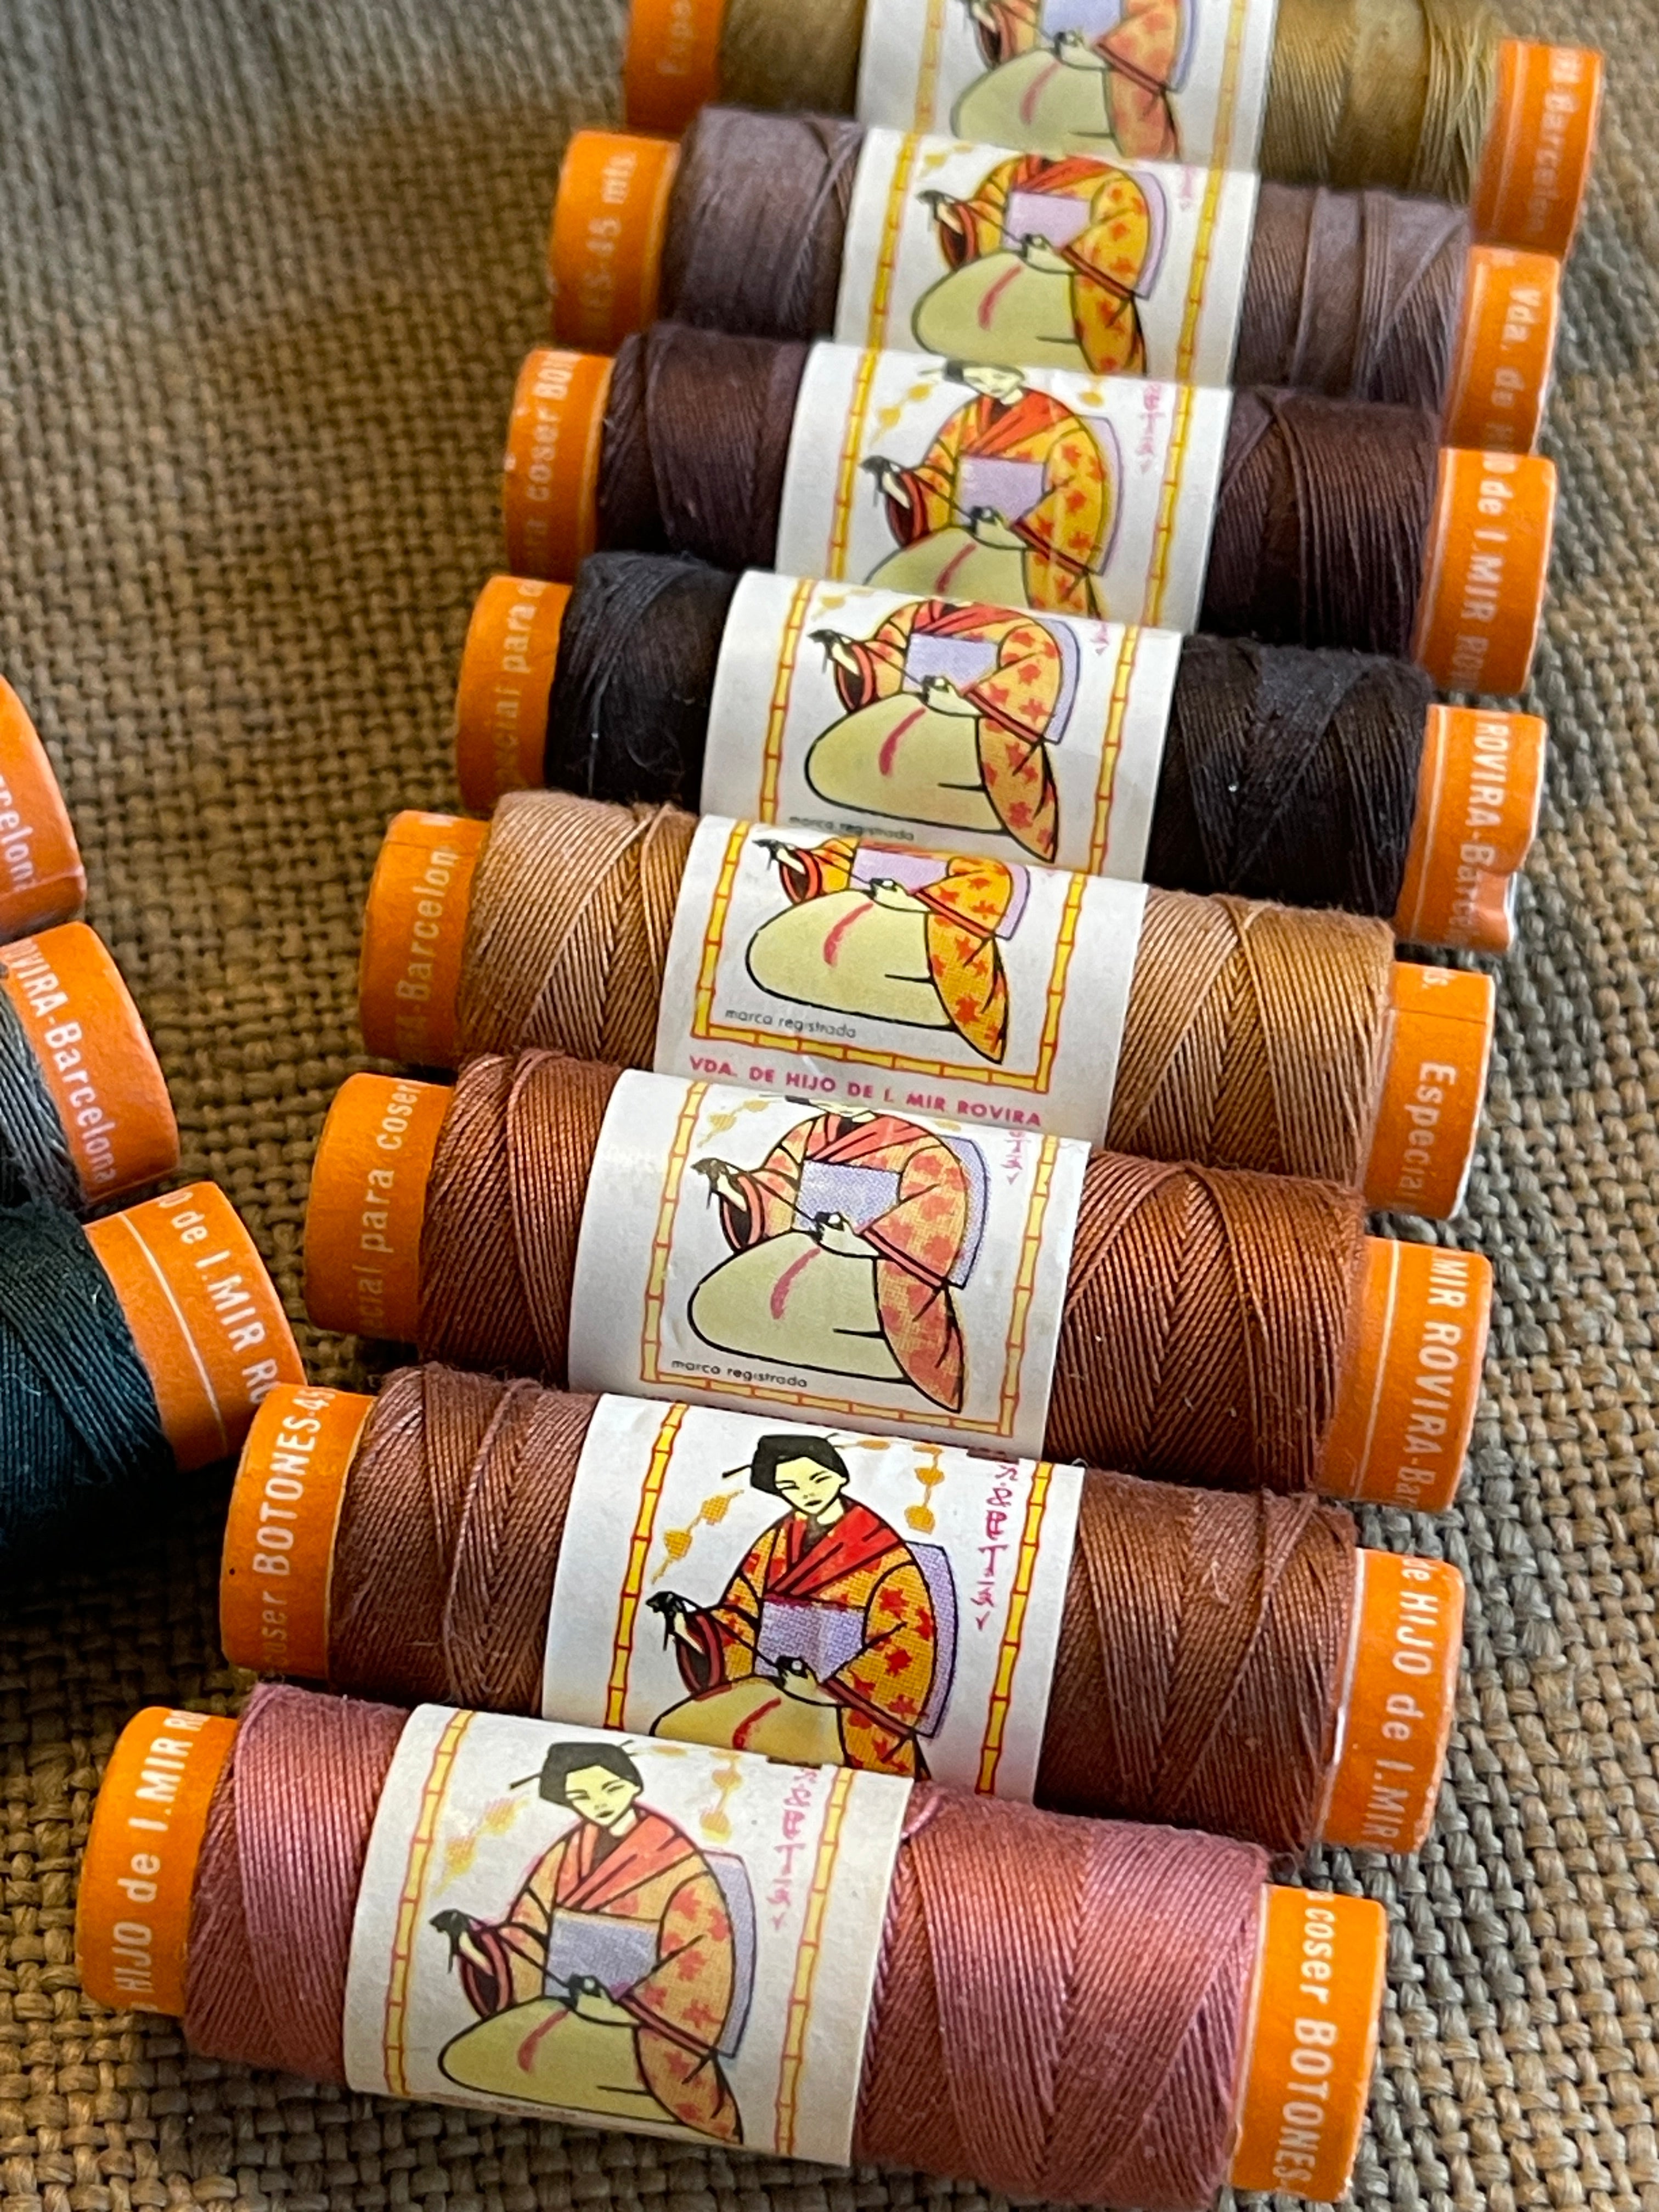 Haberdashery collection of Hilo Jaonese Threads